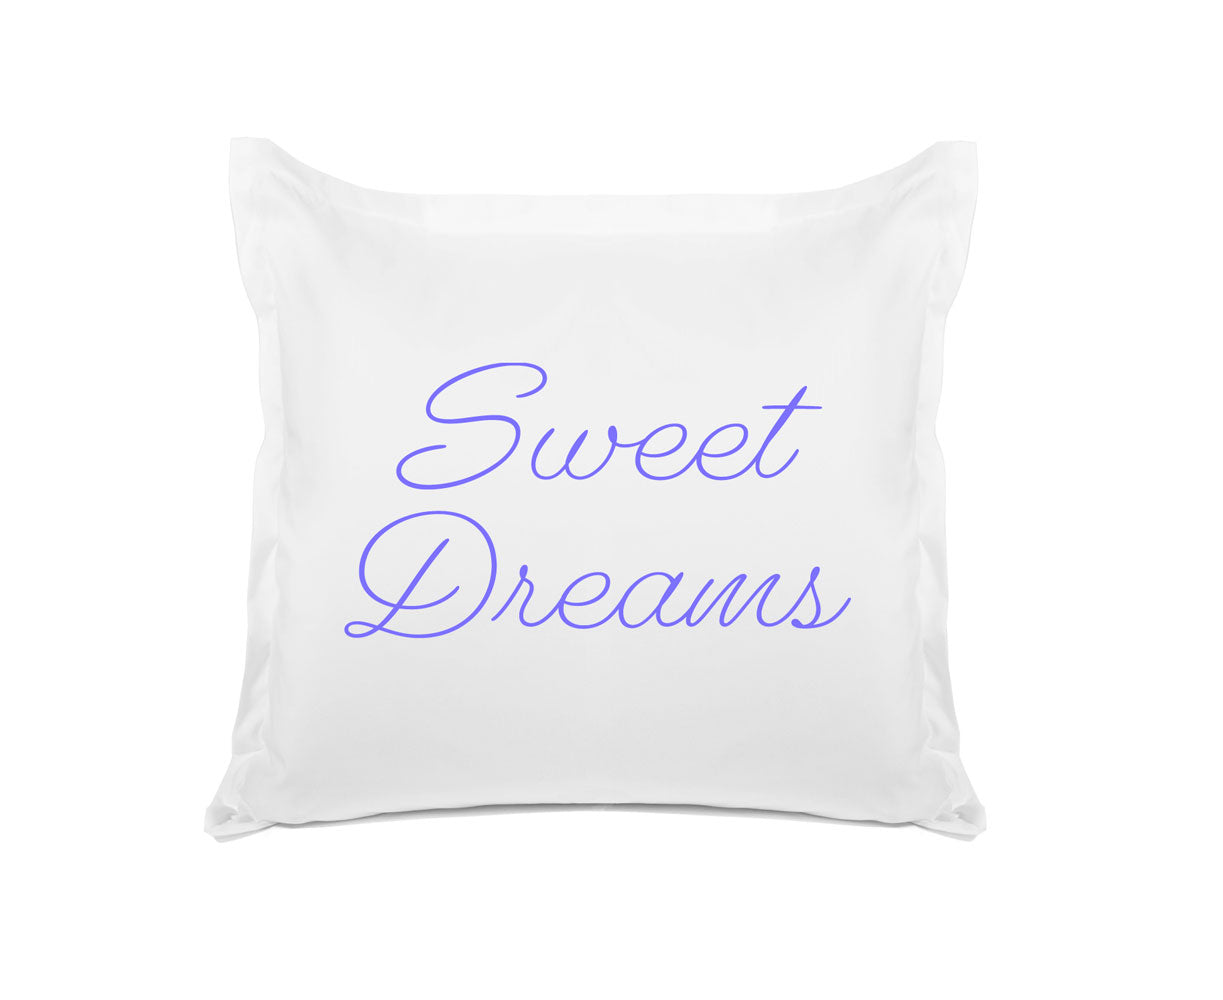 Sweet Dreams - Inspirational Quotes Pillowcase Collection-Di Lewis